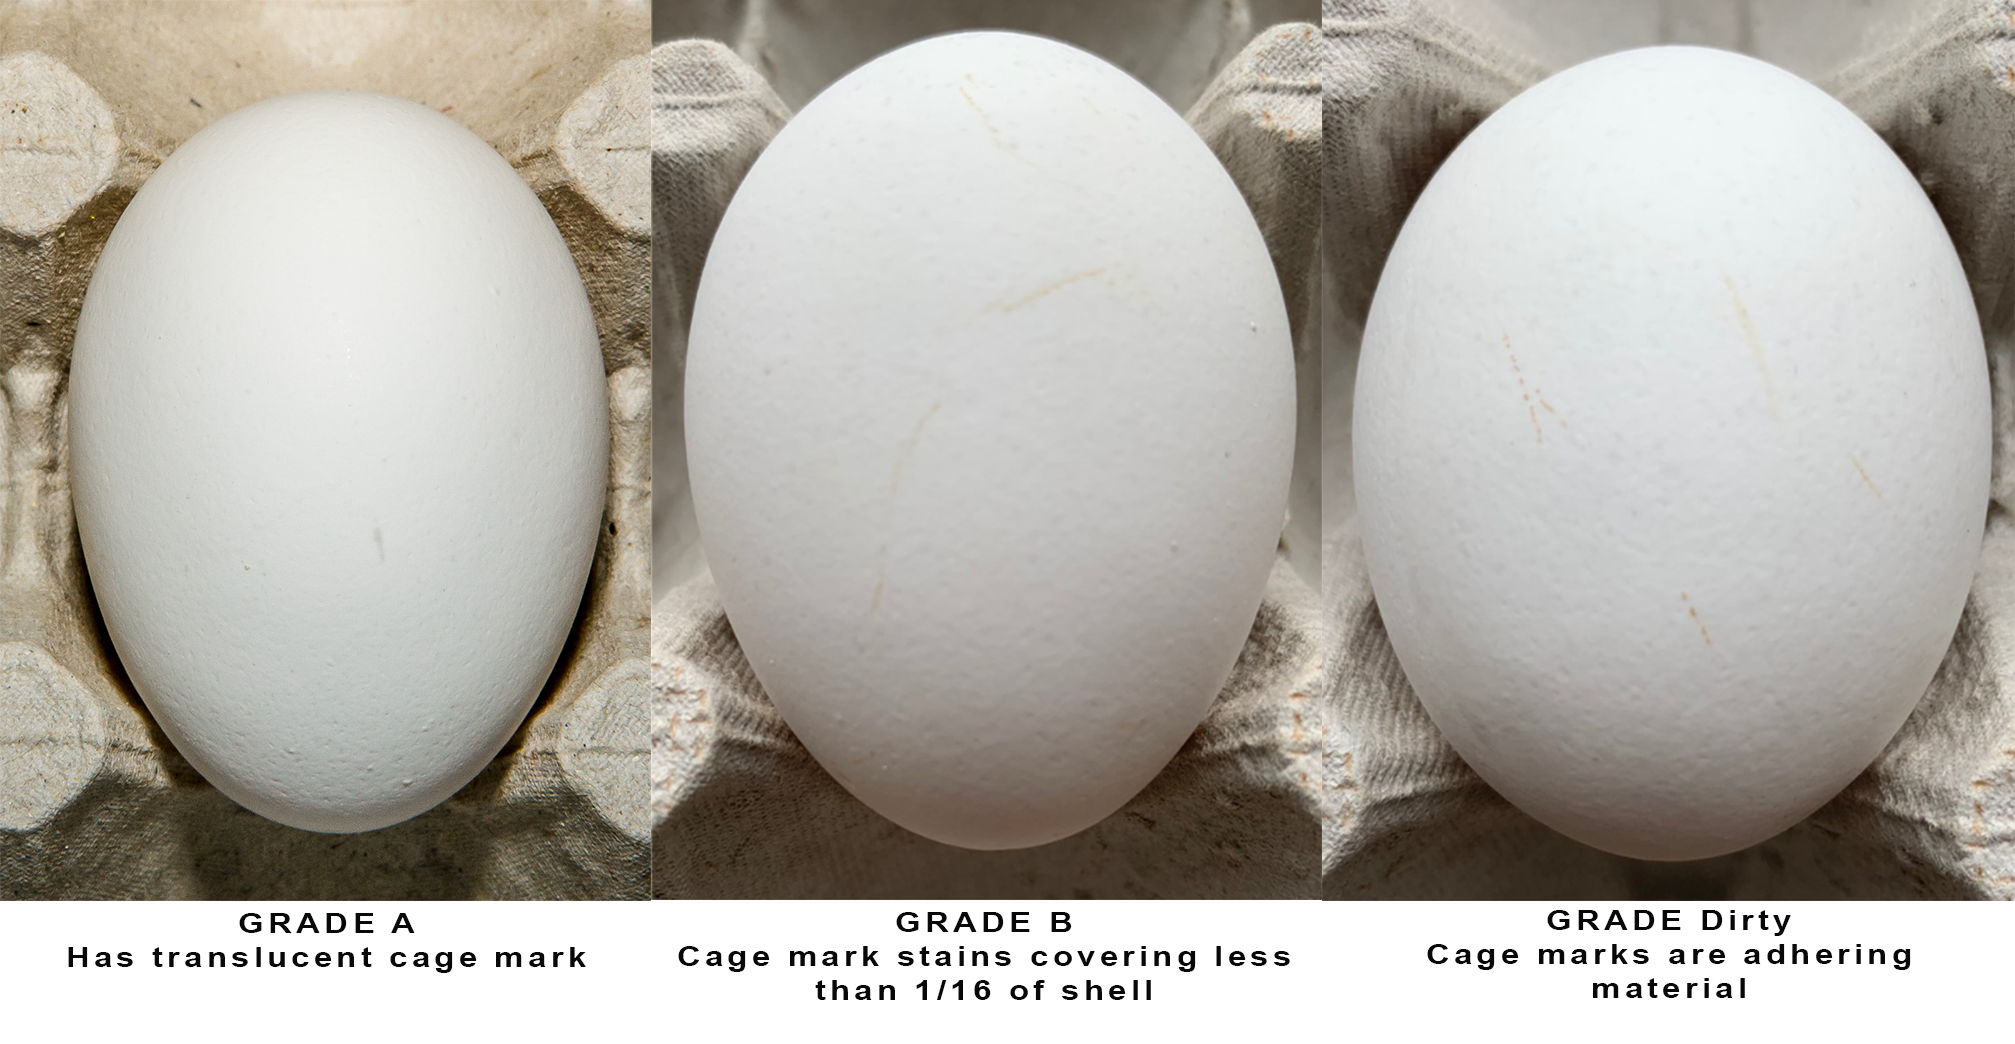 Figure 2. Example of eggs with cage marks